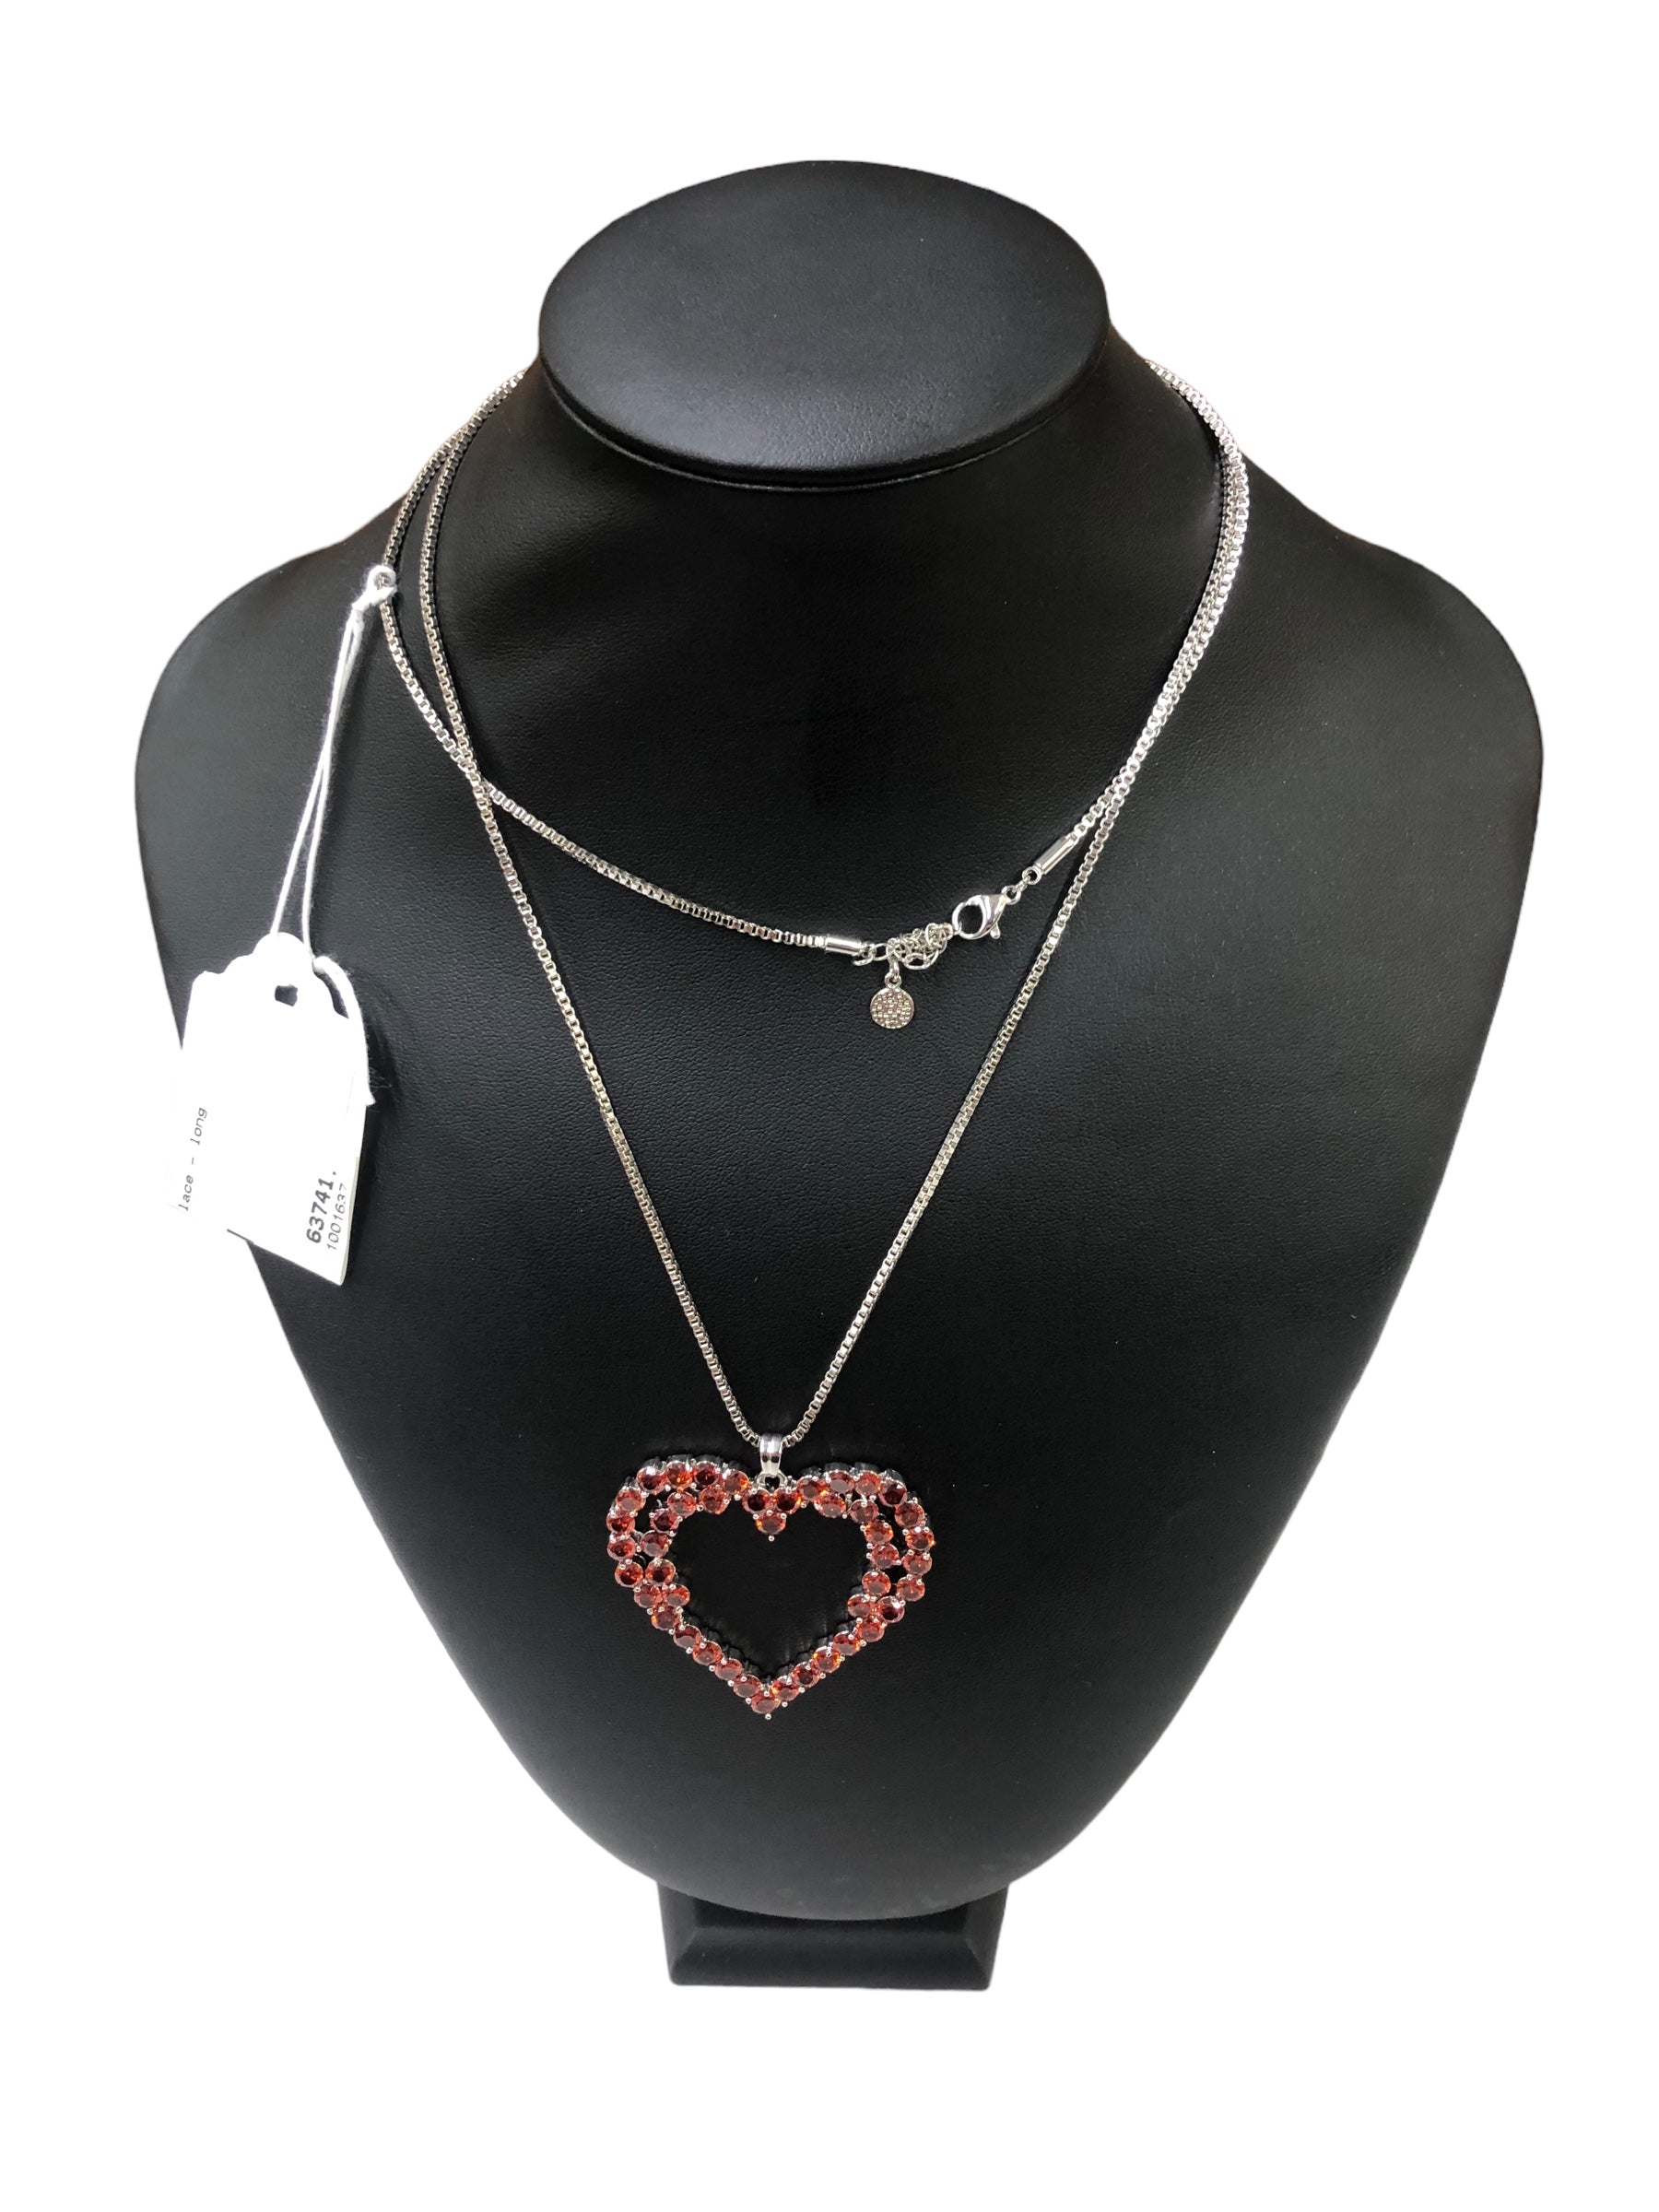 Red crystal heart necklace - long